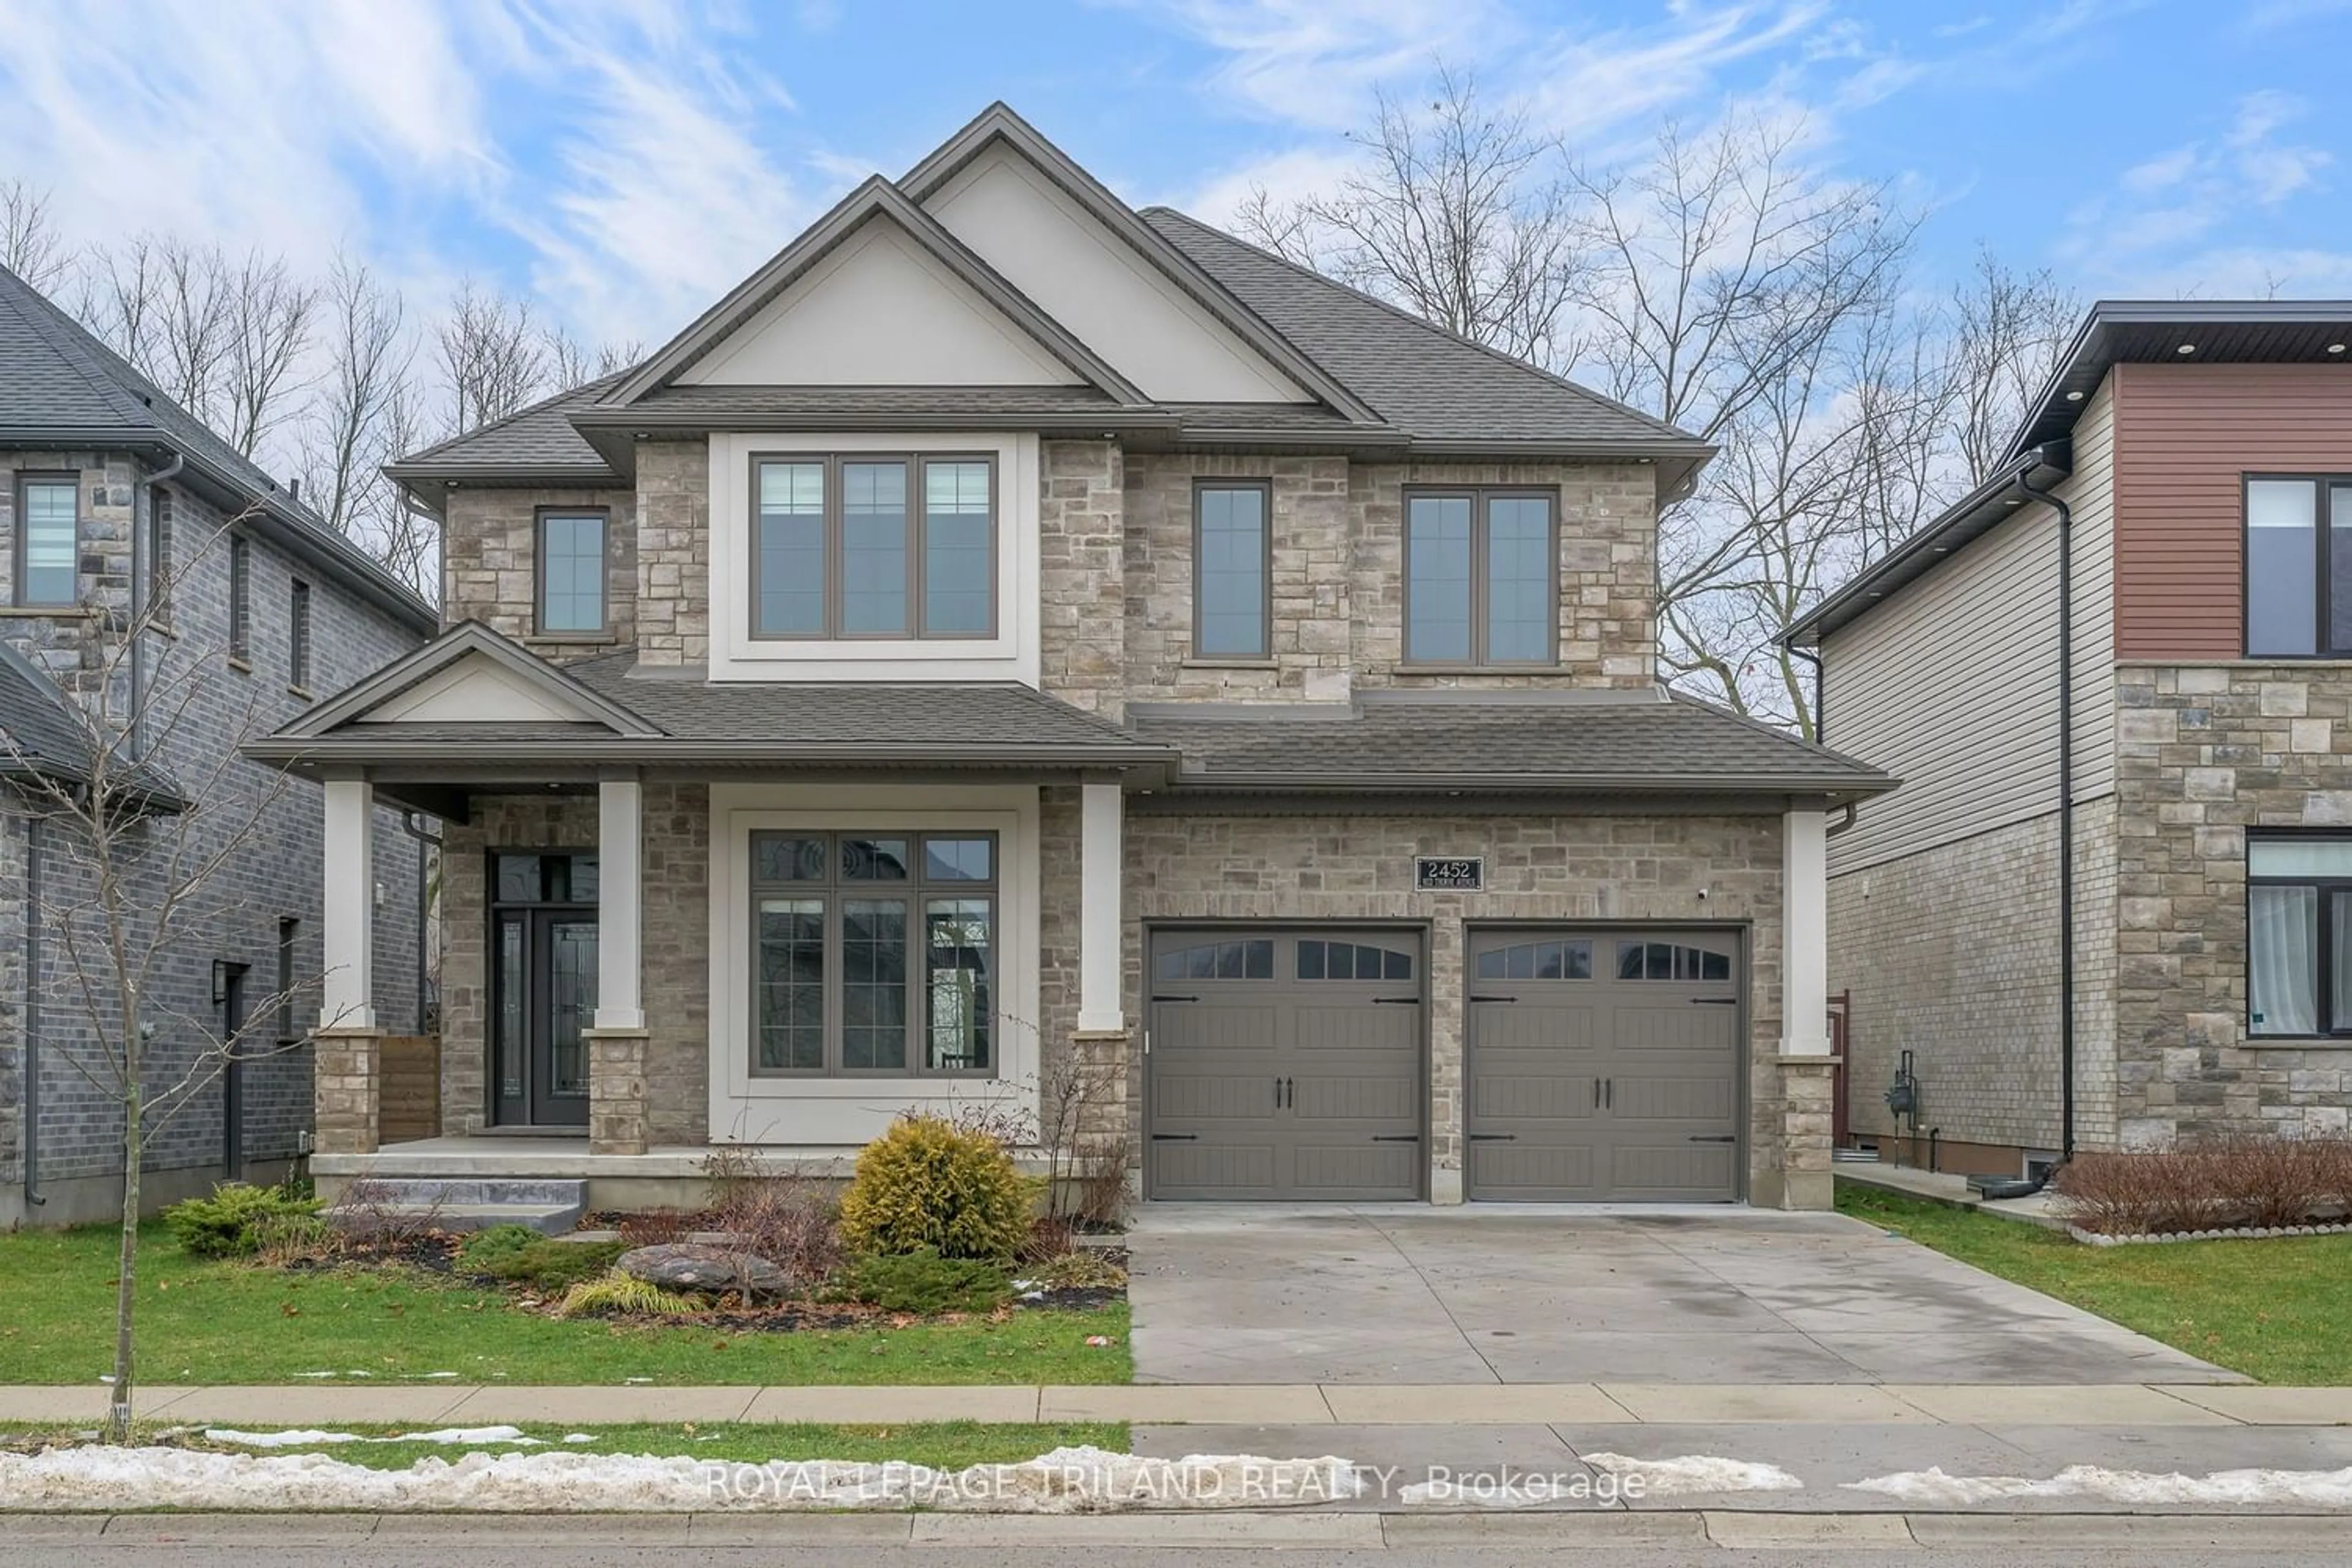 Home with brick exterior material for 2452 Red Thorne Ave, London Ontario N6P 0E7